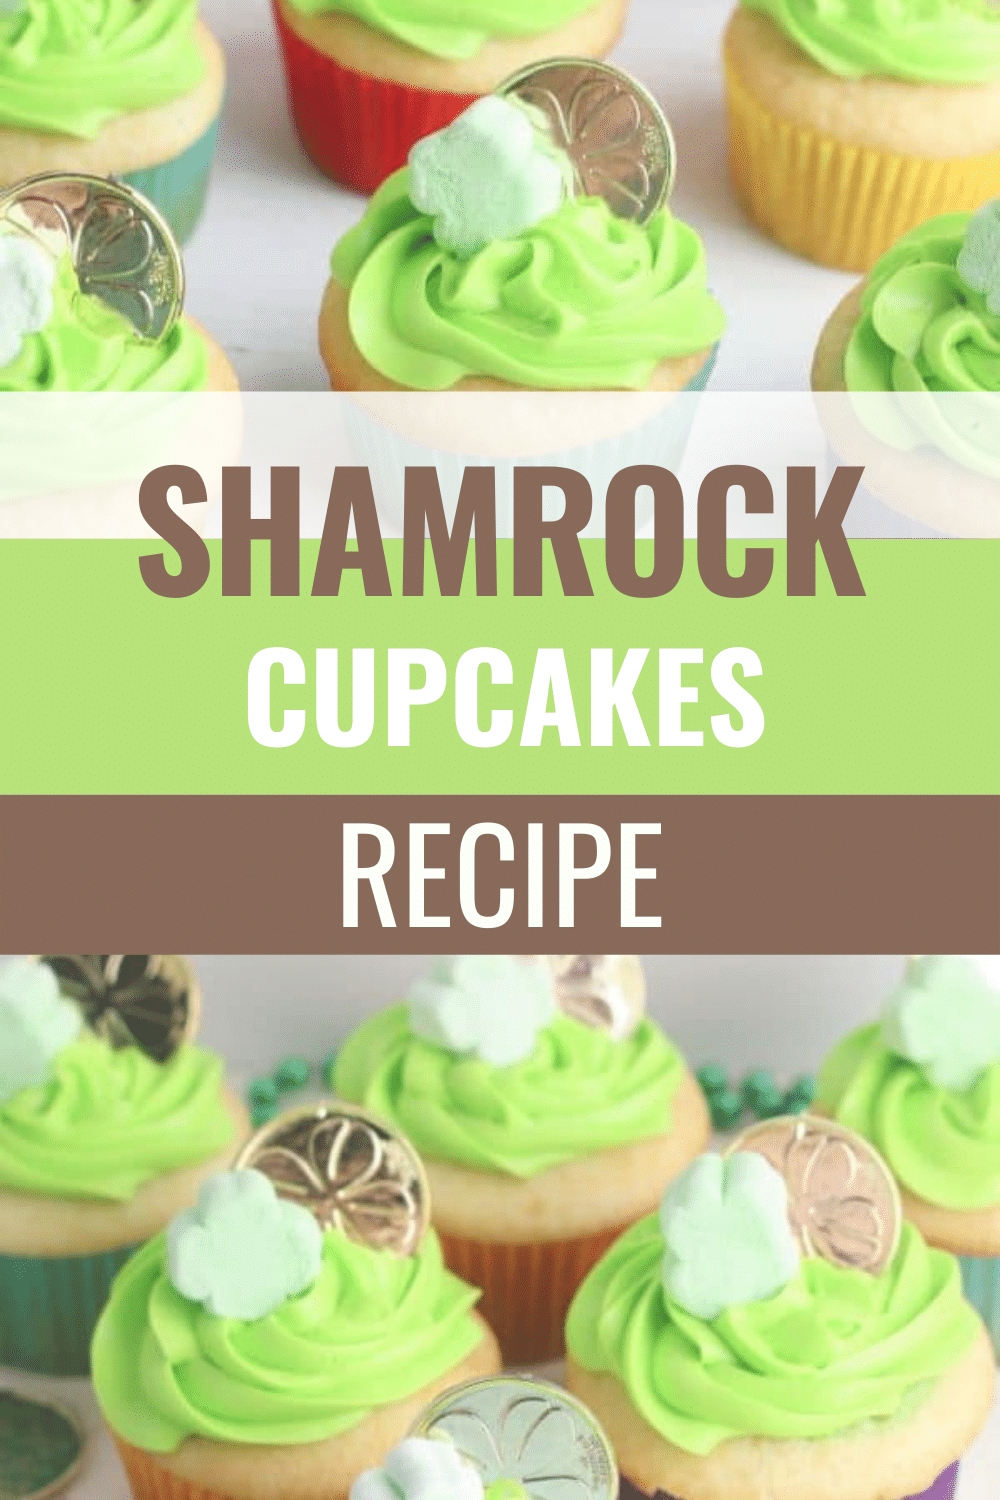 These Easy Shamrock Cupcakes are sure to satisfy the most mischievous of leprechauns. Anyone who gets to enjoy one will certainly feel lucky! #stpatricksday #shamrock #cupcakes via @wondermomwannab